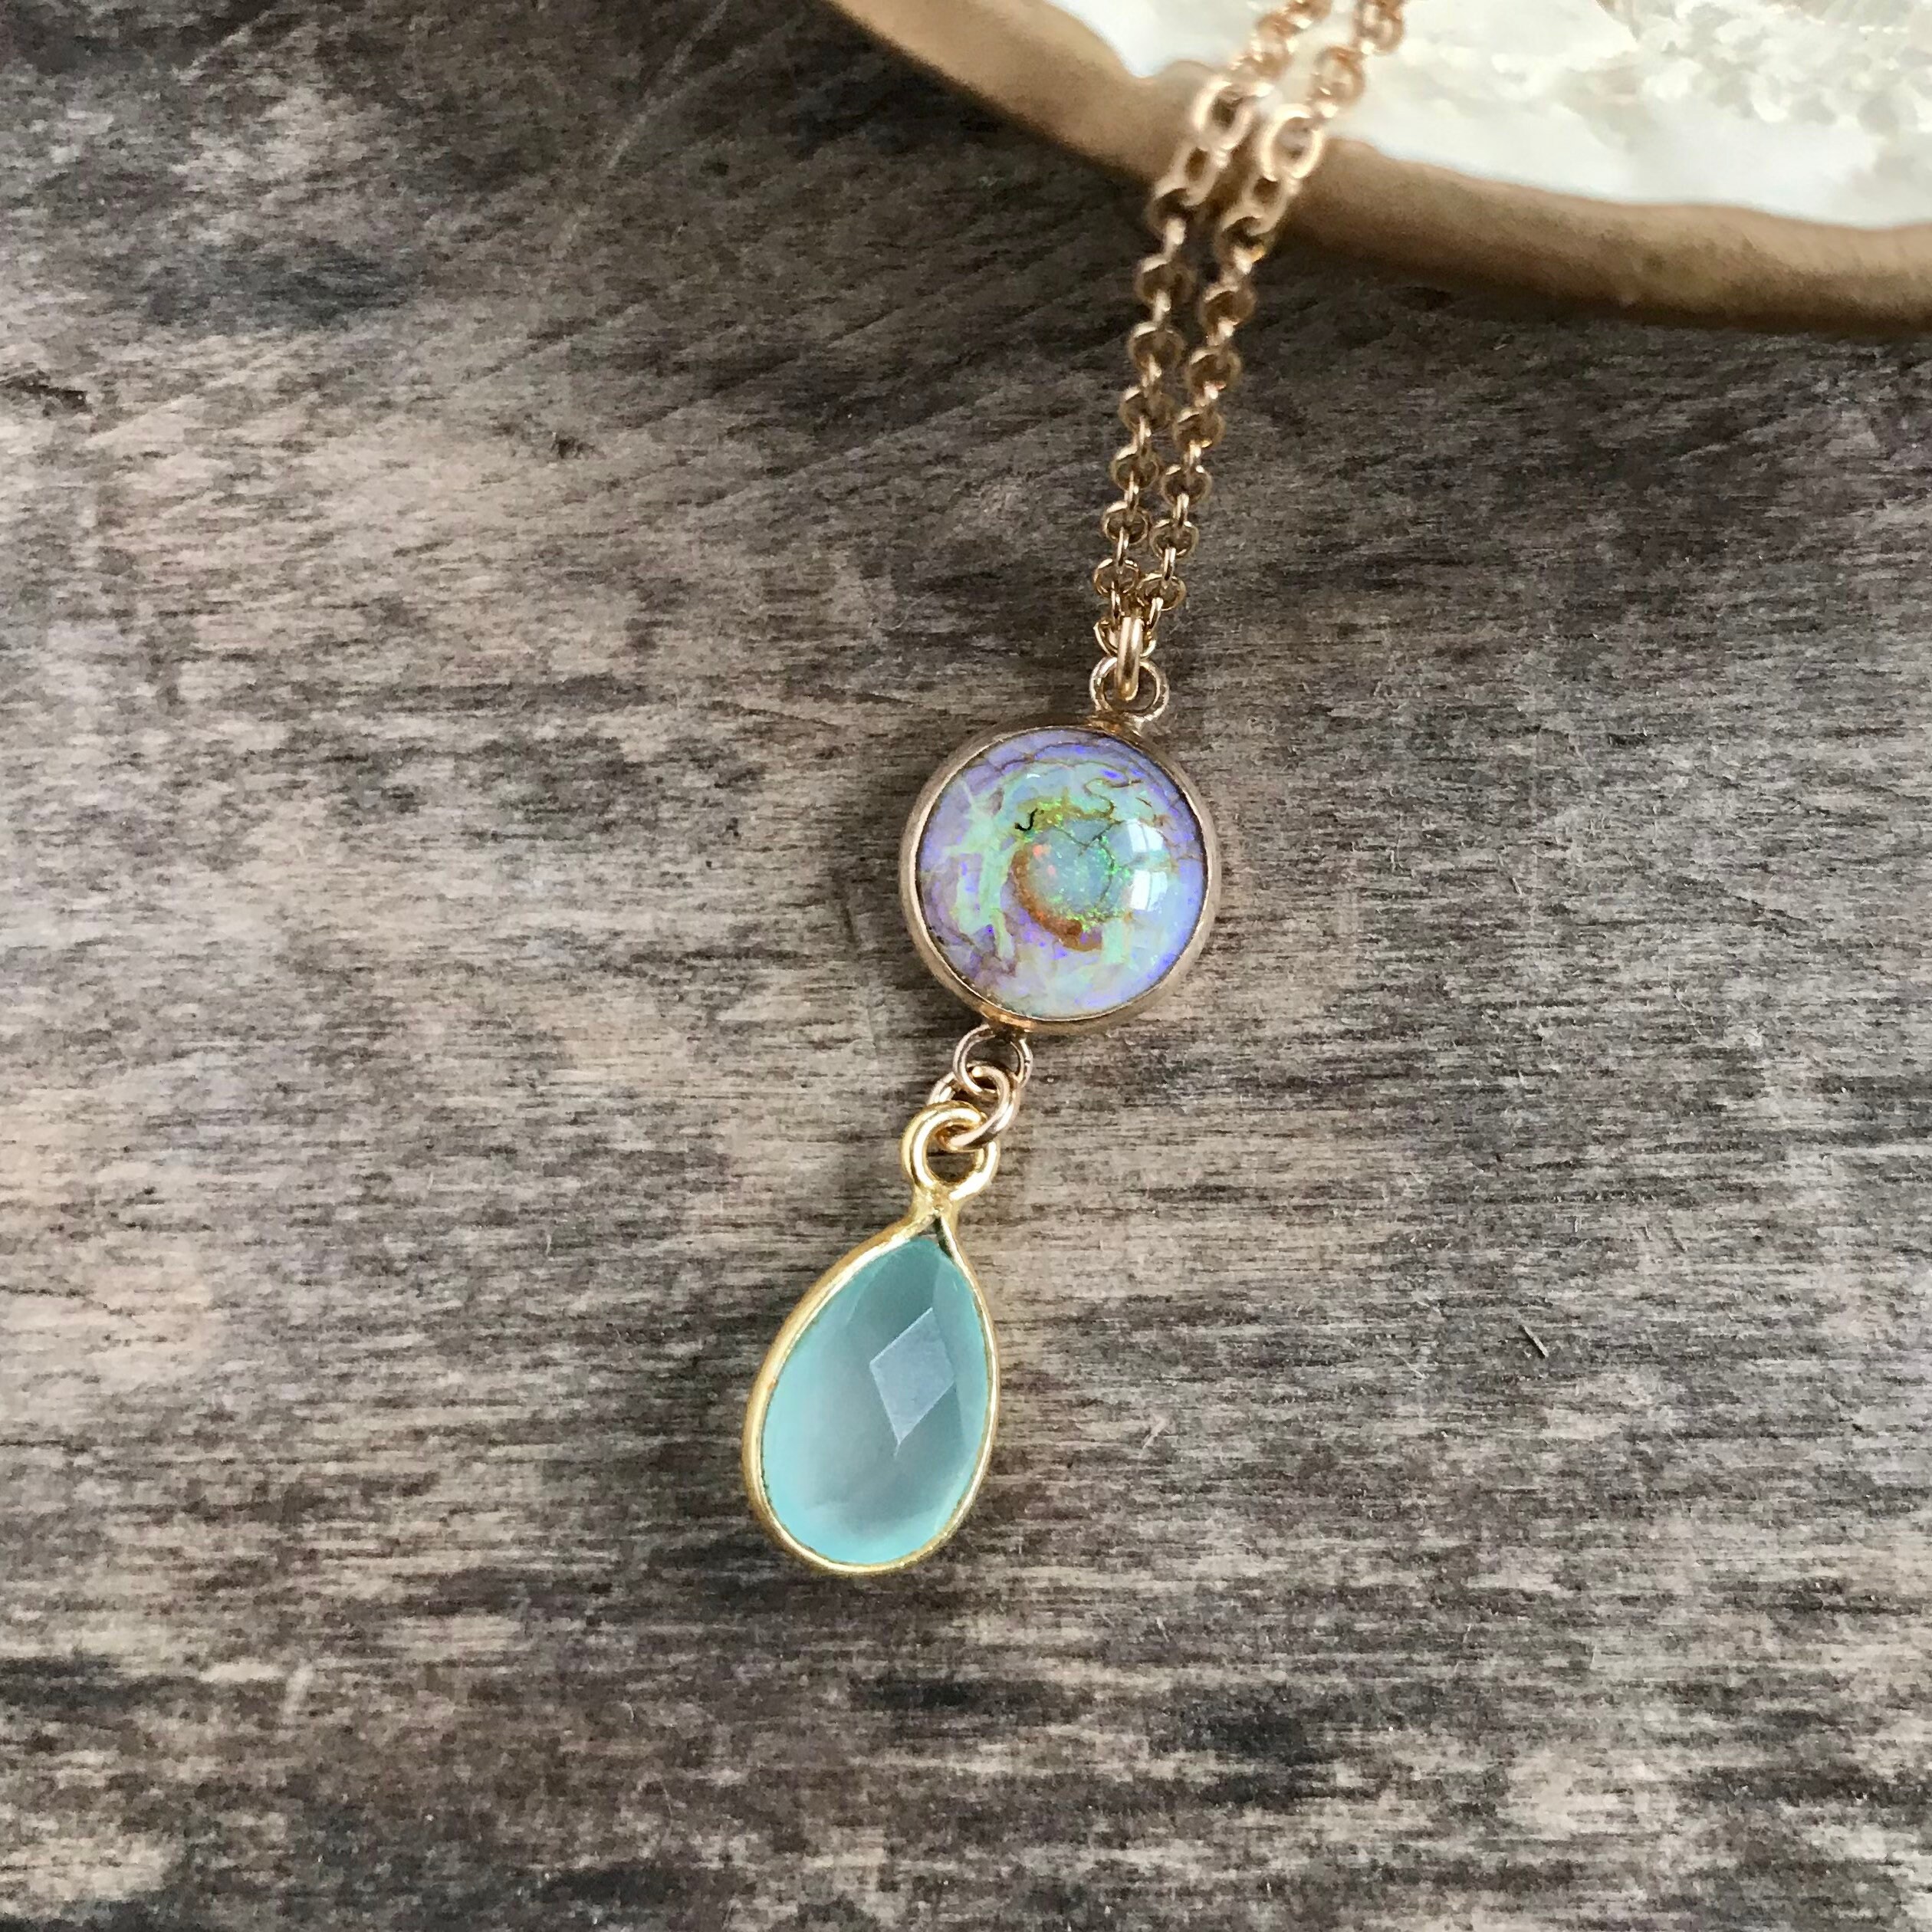 Opal Necklace Sea Green Chalcedony Necklace Minimal Delicate | Etsy